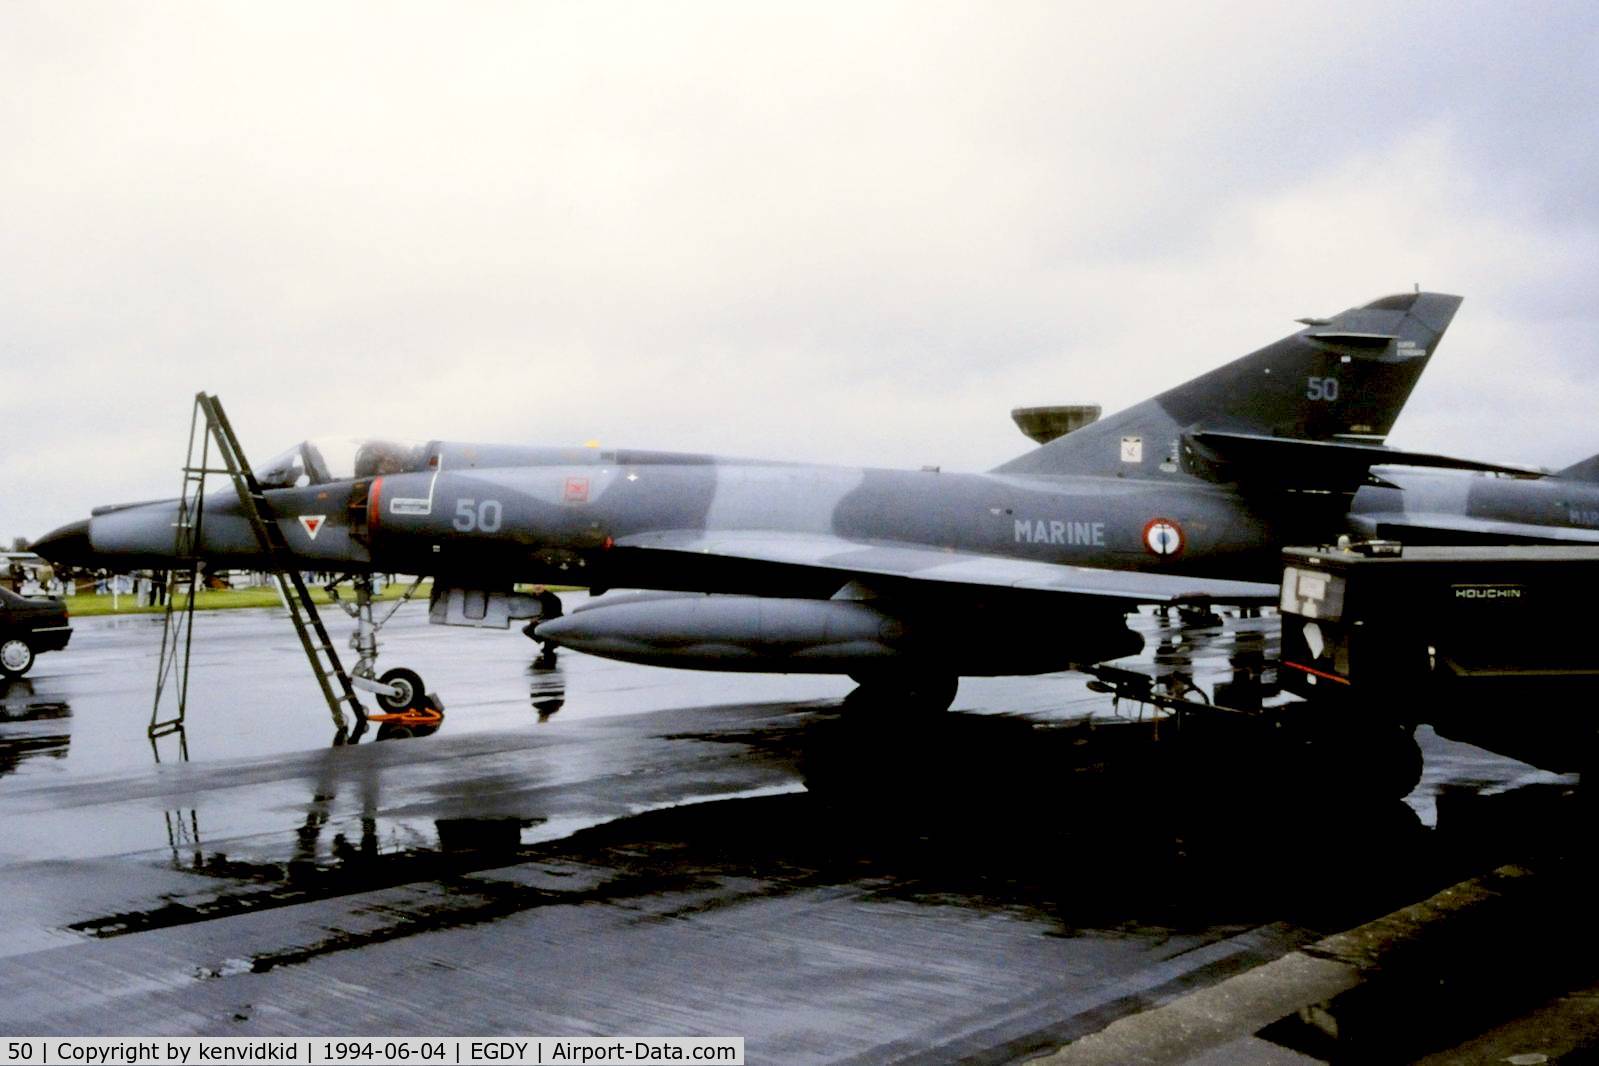 50, Dassault Super Etendard C/N 52, On static display at the RNAS Yeovilton 1994 50th Anniversary of D Day photocall. It rained all day.